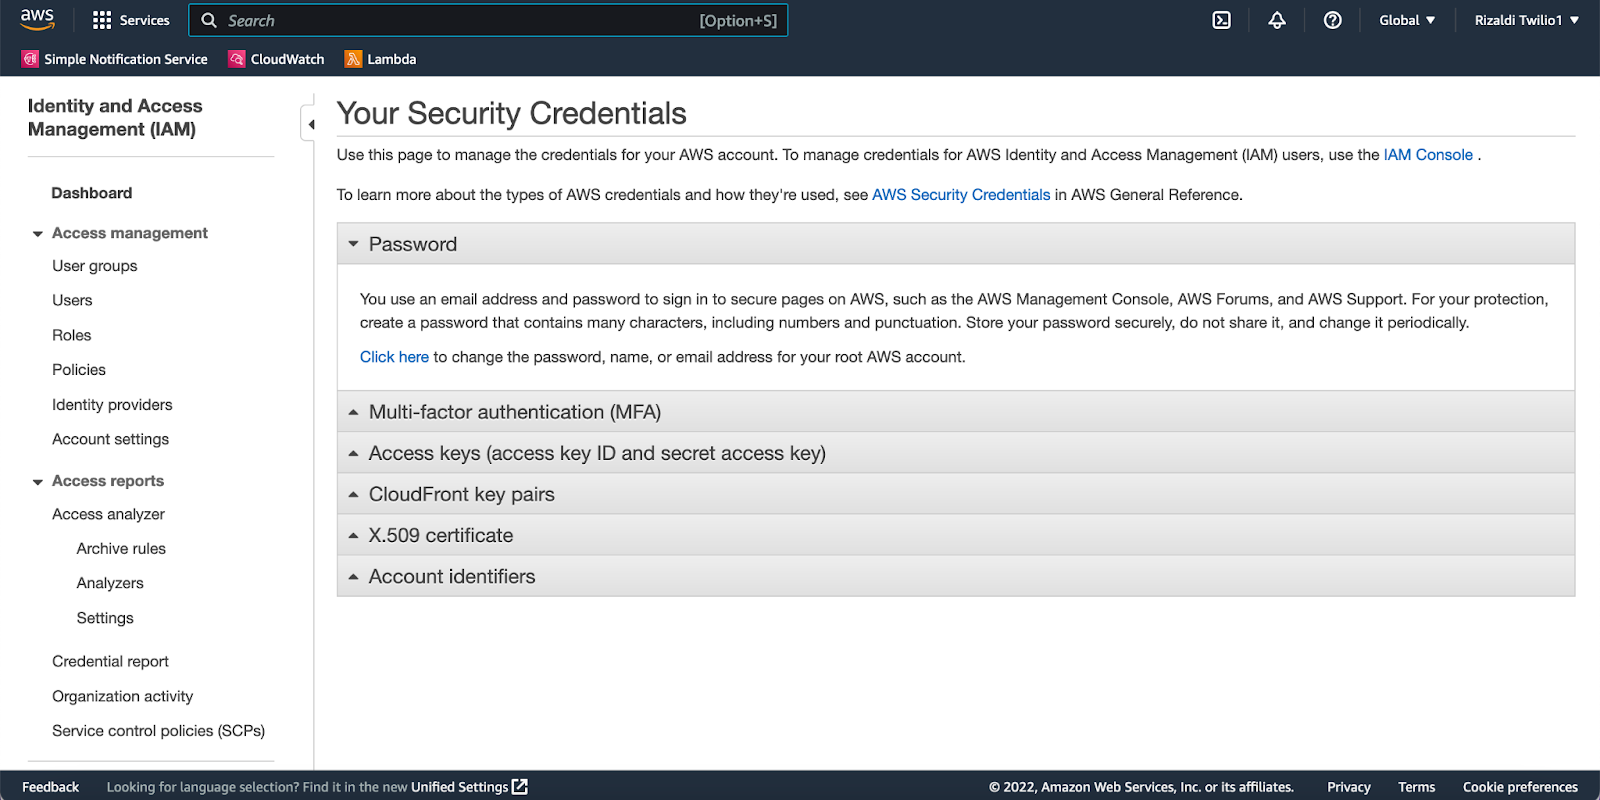 "Your Security Credentials" page in AWS console